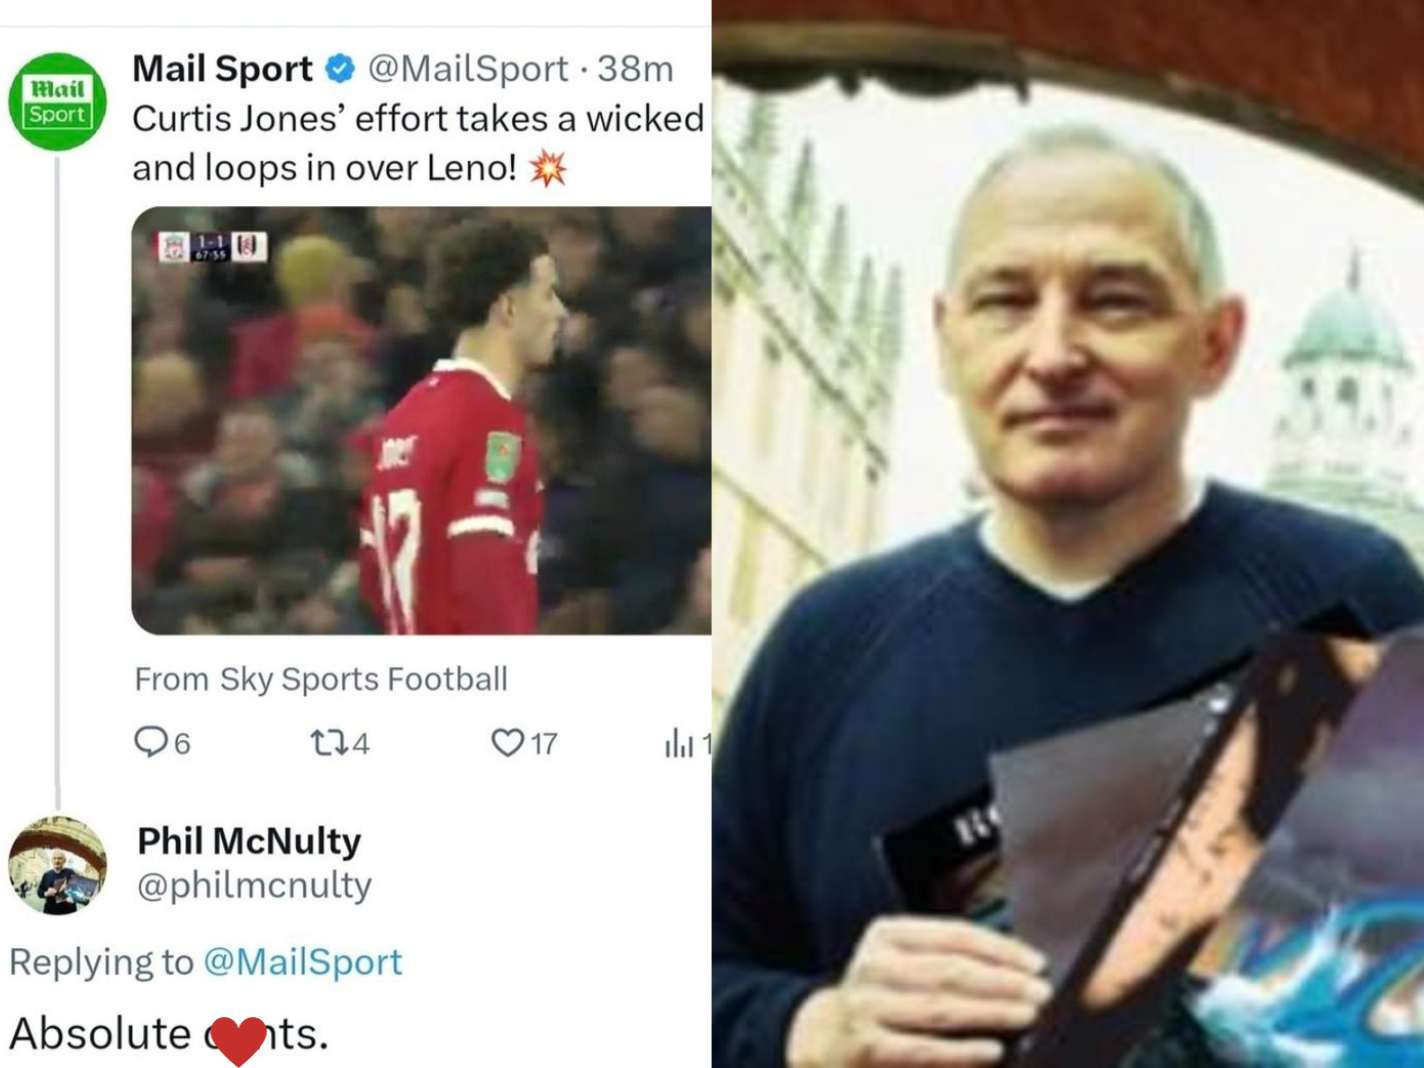 Twitter Reacts to Phil McNulty’s Accidental Liverpool Tweet